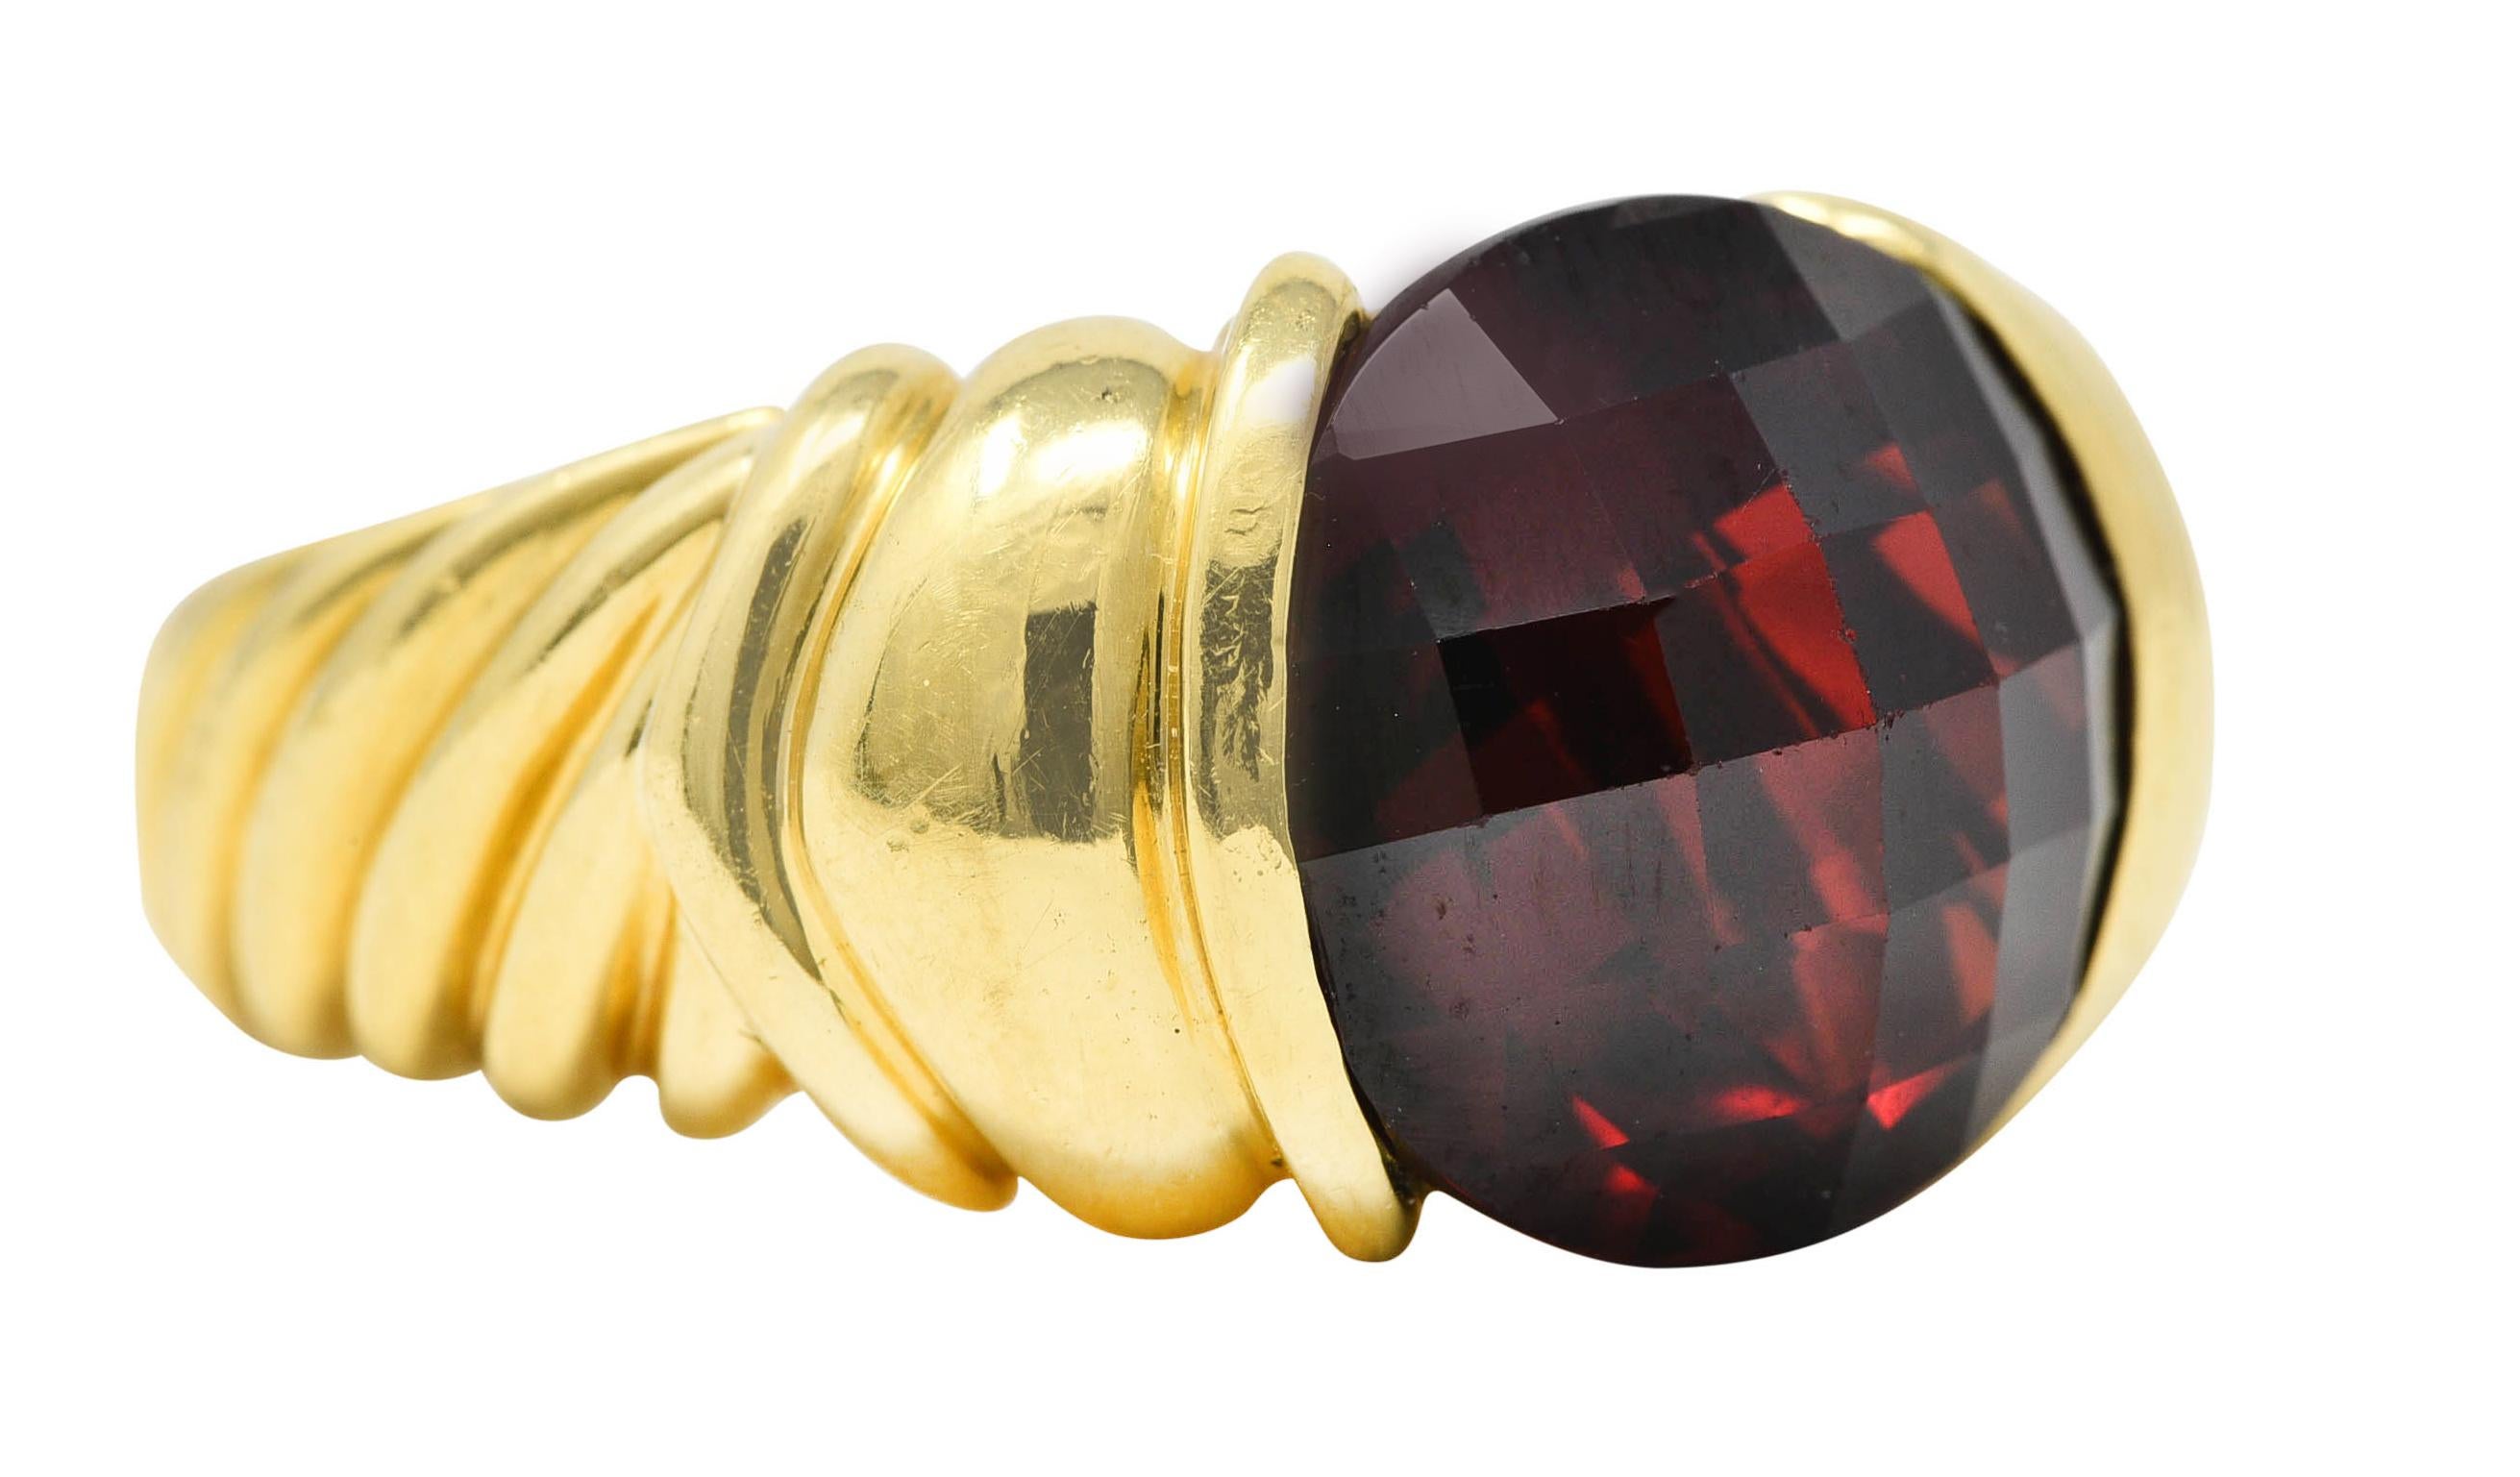 Centering a 12.0 mm round checkerboard cut garnet - transparent deep red. Set in partial bezel and flanked by ridged shoulders. With twisted cable motif shank. Stamped 750 for 18 karat gold. With maker's mark for David Yurman. Circa: 2000's from the